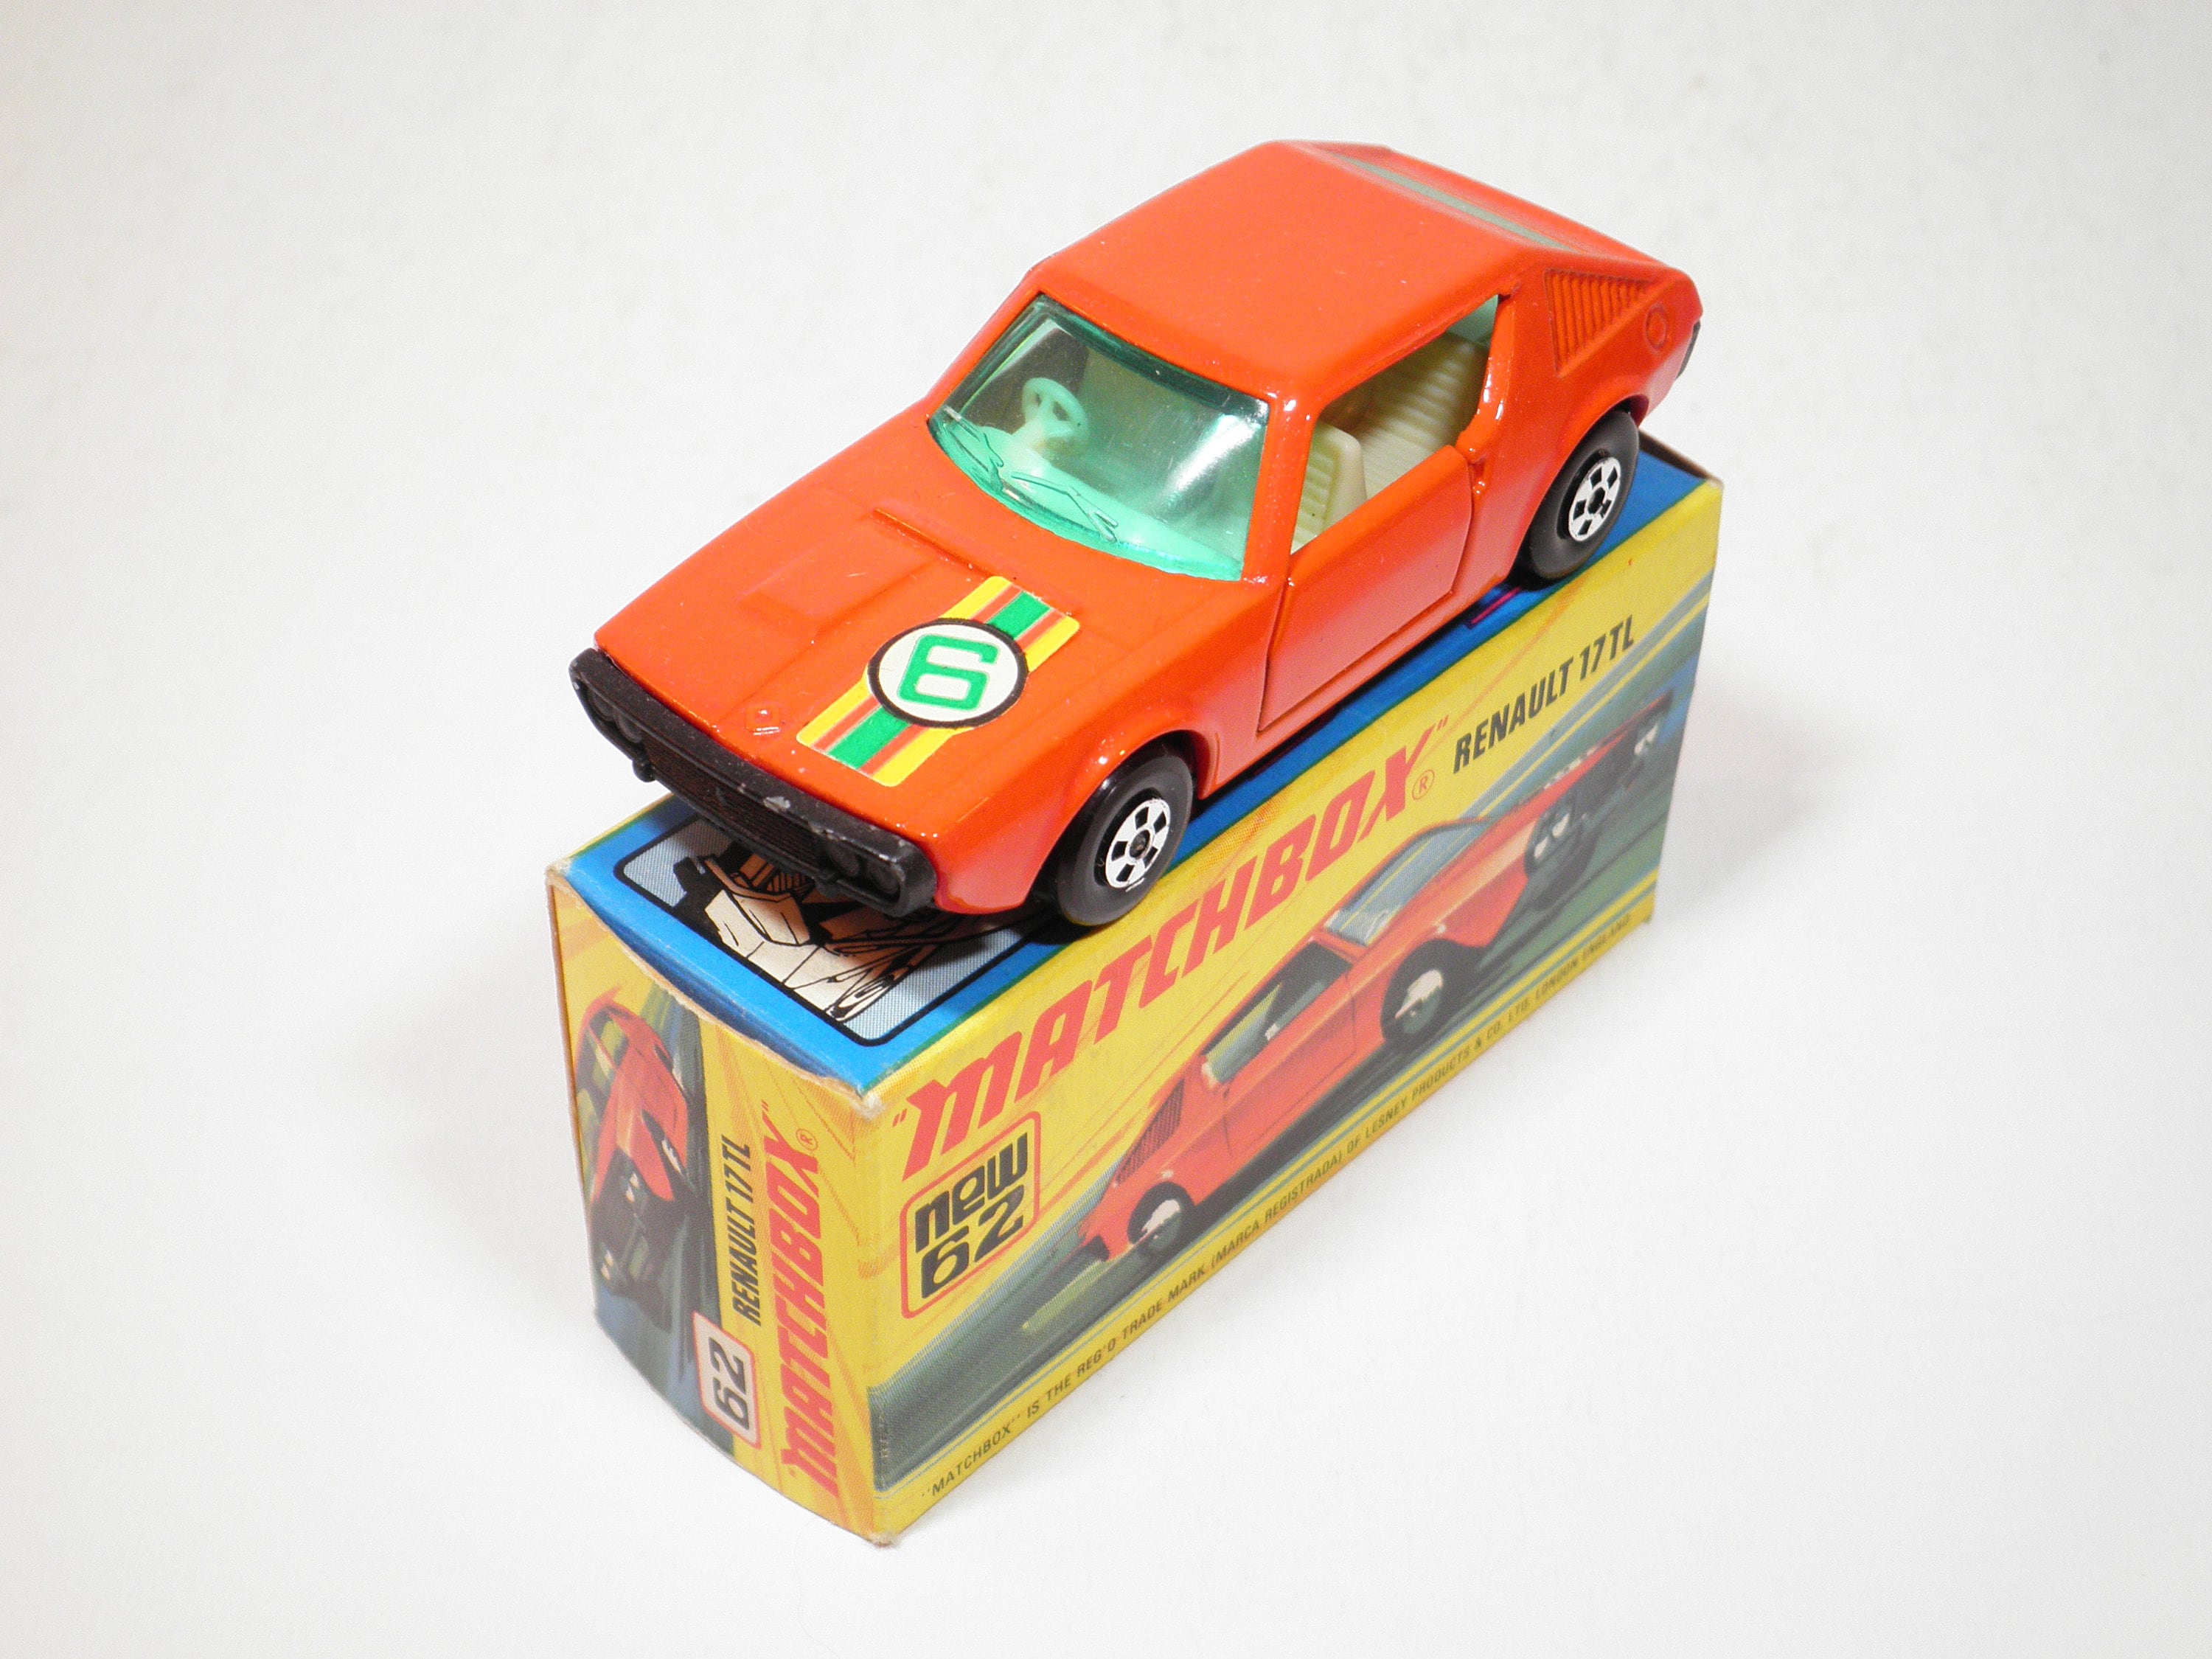 Matchbox Superfast No 62 Renault 17 TL Like New in Original - Etsy